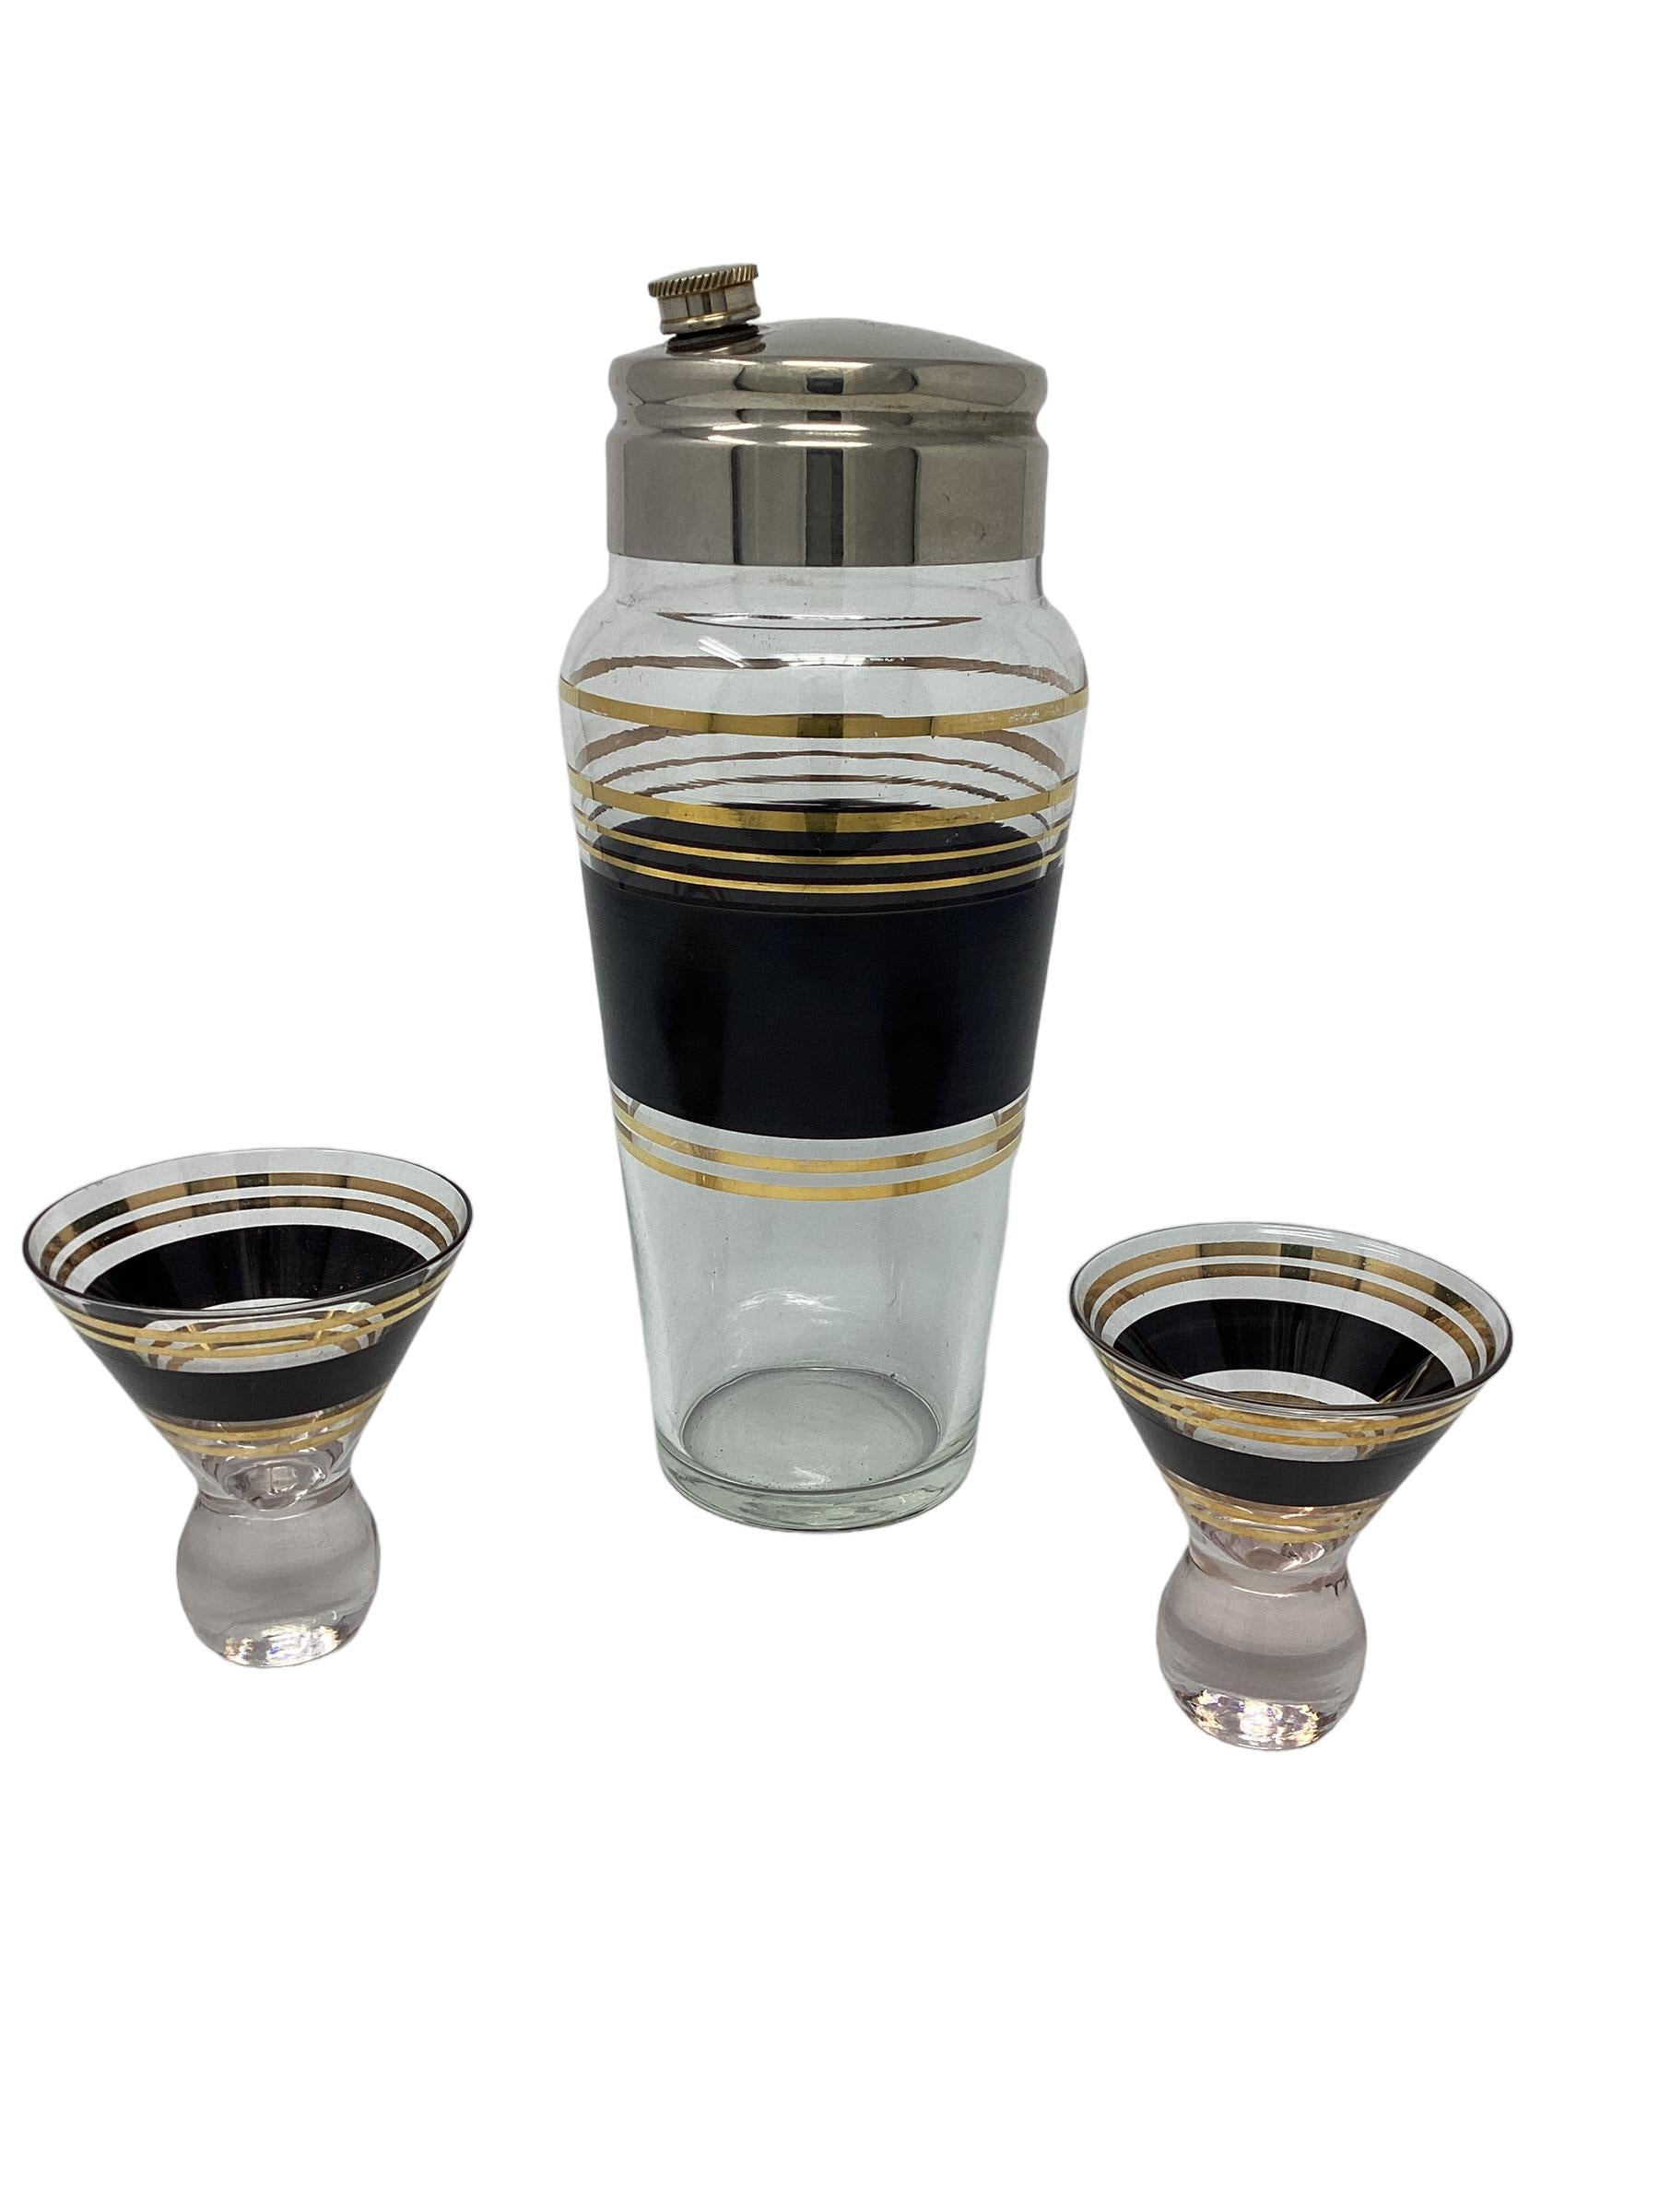 Vintage Mid Century Cocktail Set decorated with a wide band in black enamel  and gold bands. The shaker is topped with a chrome cover. The cocktail cups have a round weighted base and measure 3.125”w x 3.5”h.